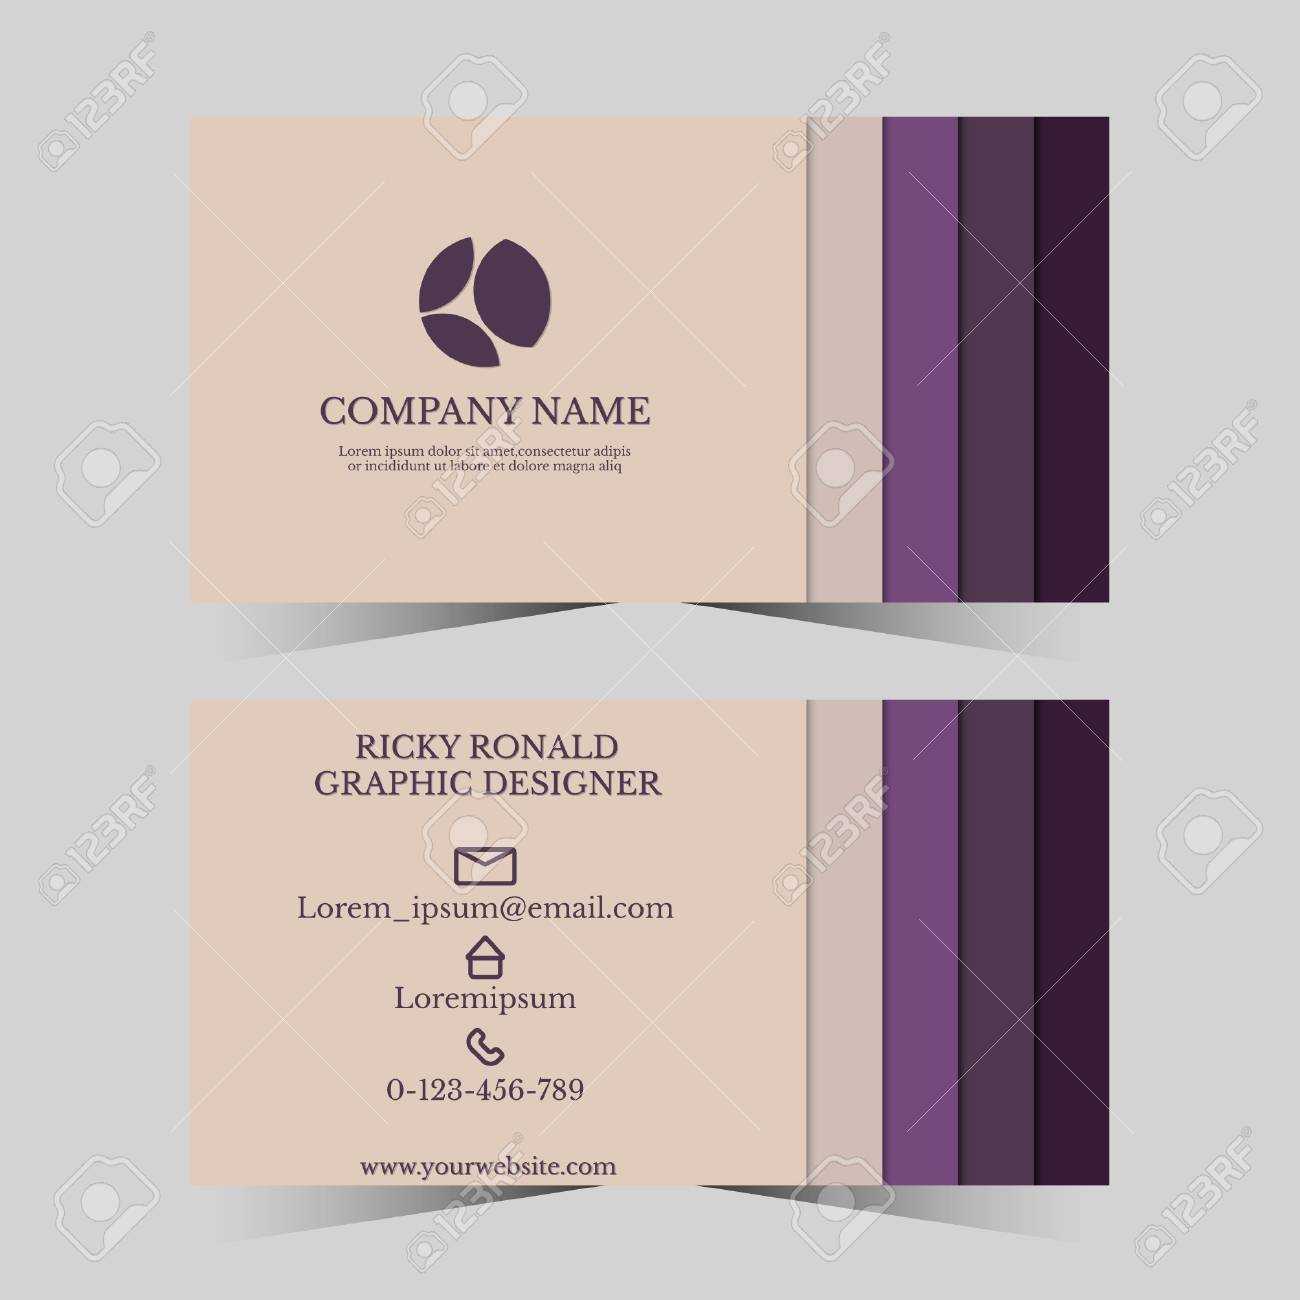 Calling Card Template For Business Man With Geometric Design Within Template For Calling Card